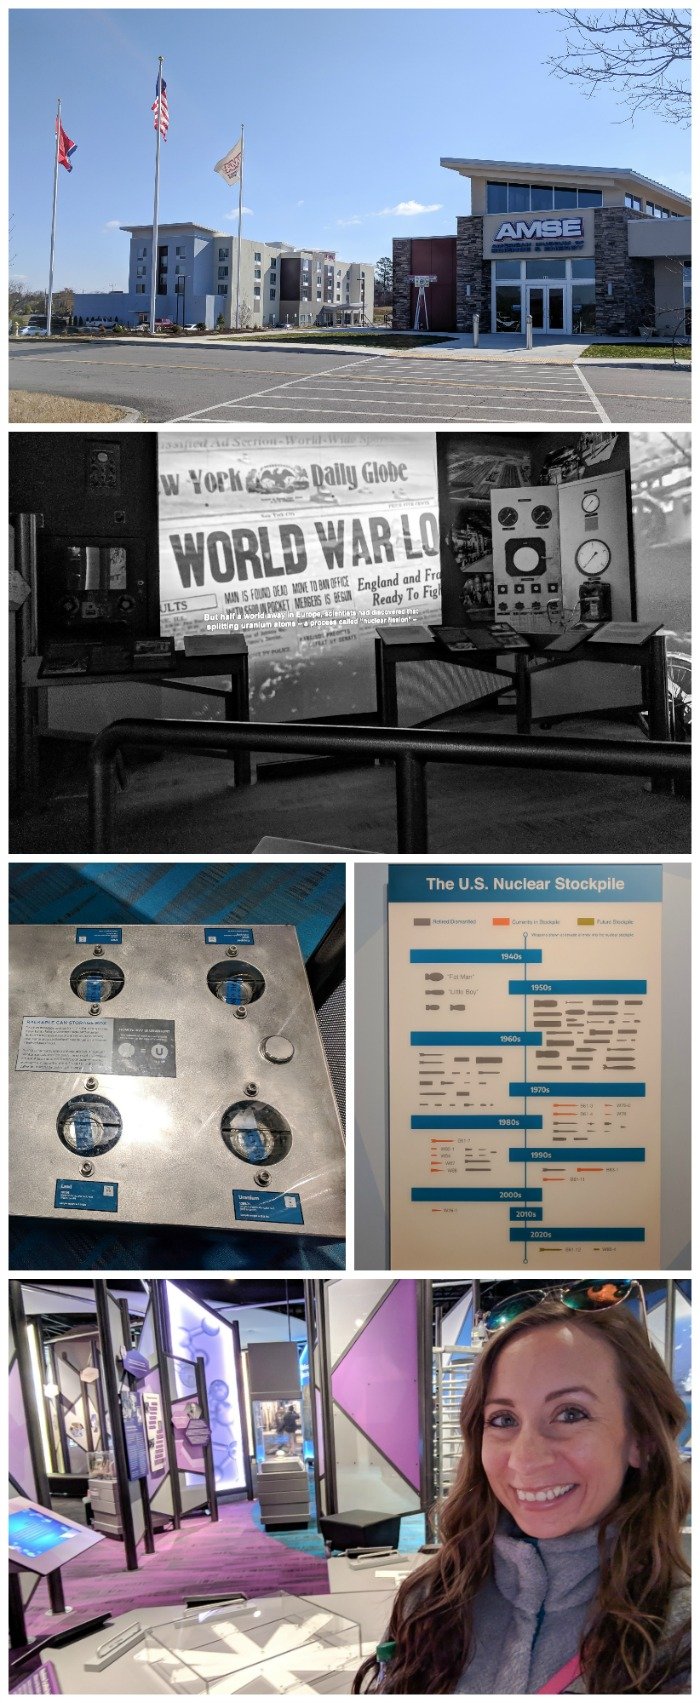 American Museum of Science and Energy | 7 Ways to Spend a Day in Oak Ridge, Tennessee | Manhattan Project | Atomic bomb | World War II | Department of Energy | Y-12, X-10 graphite reactor | #Oakridge #WWII #manhattanproject #tennessee